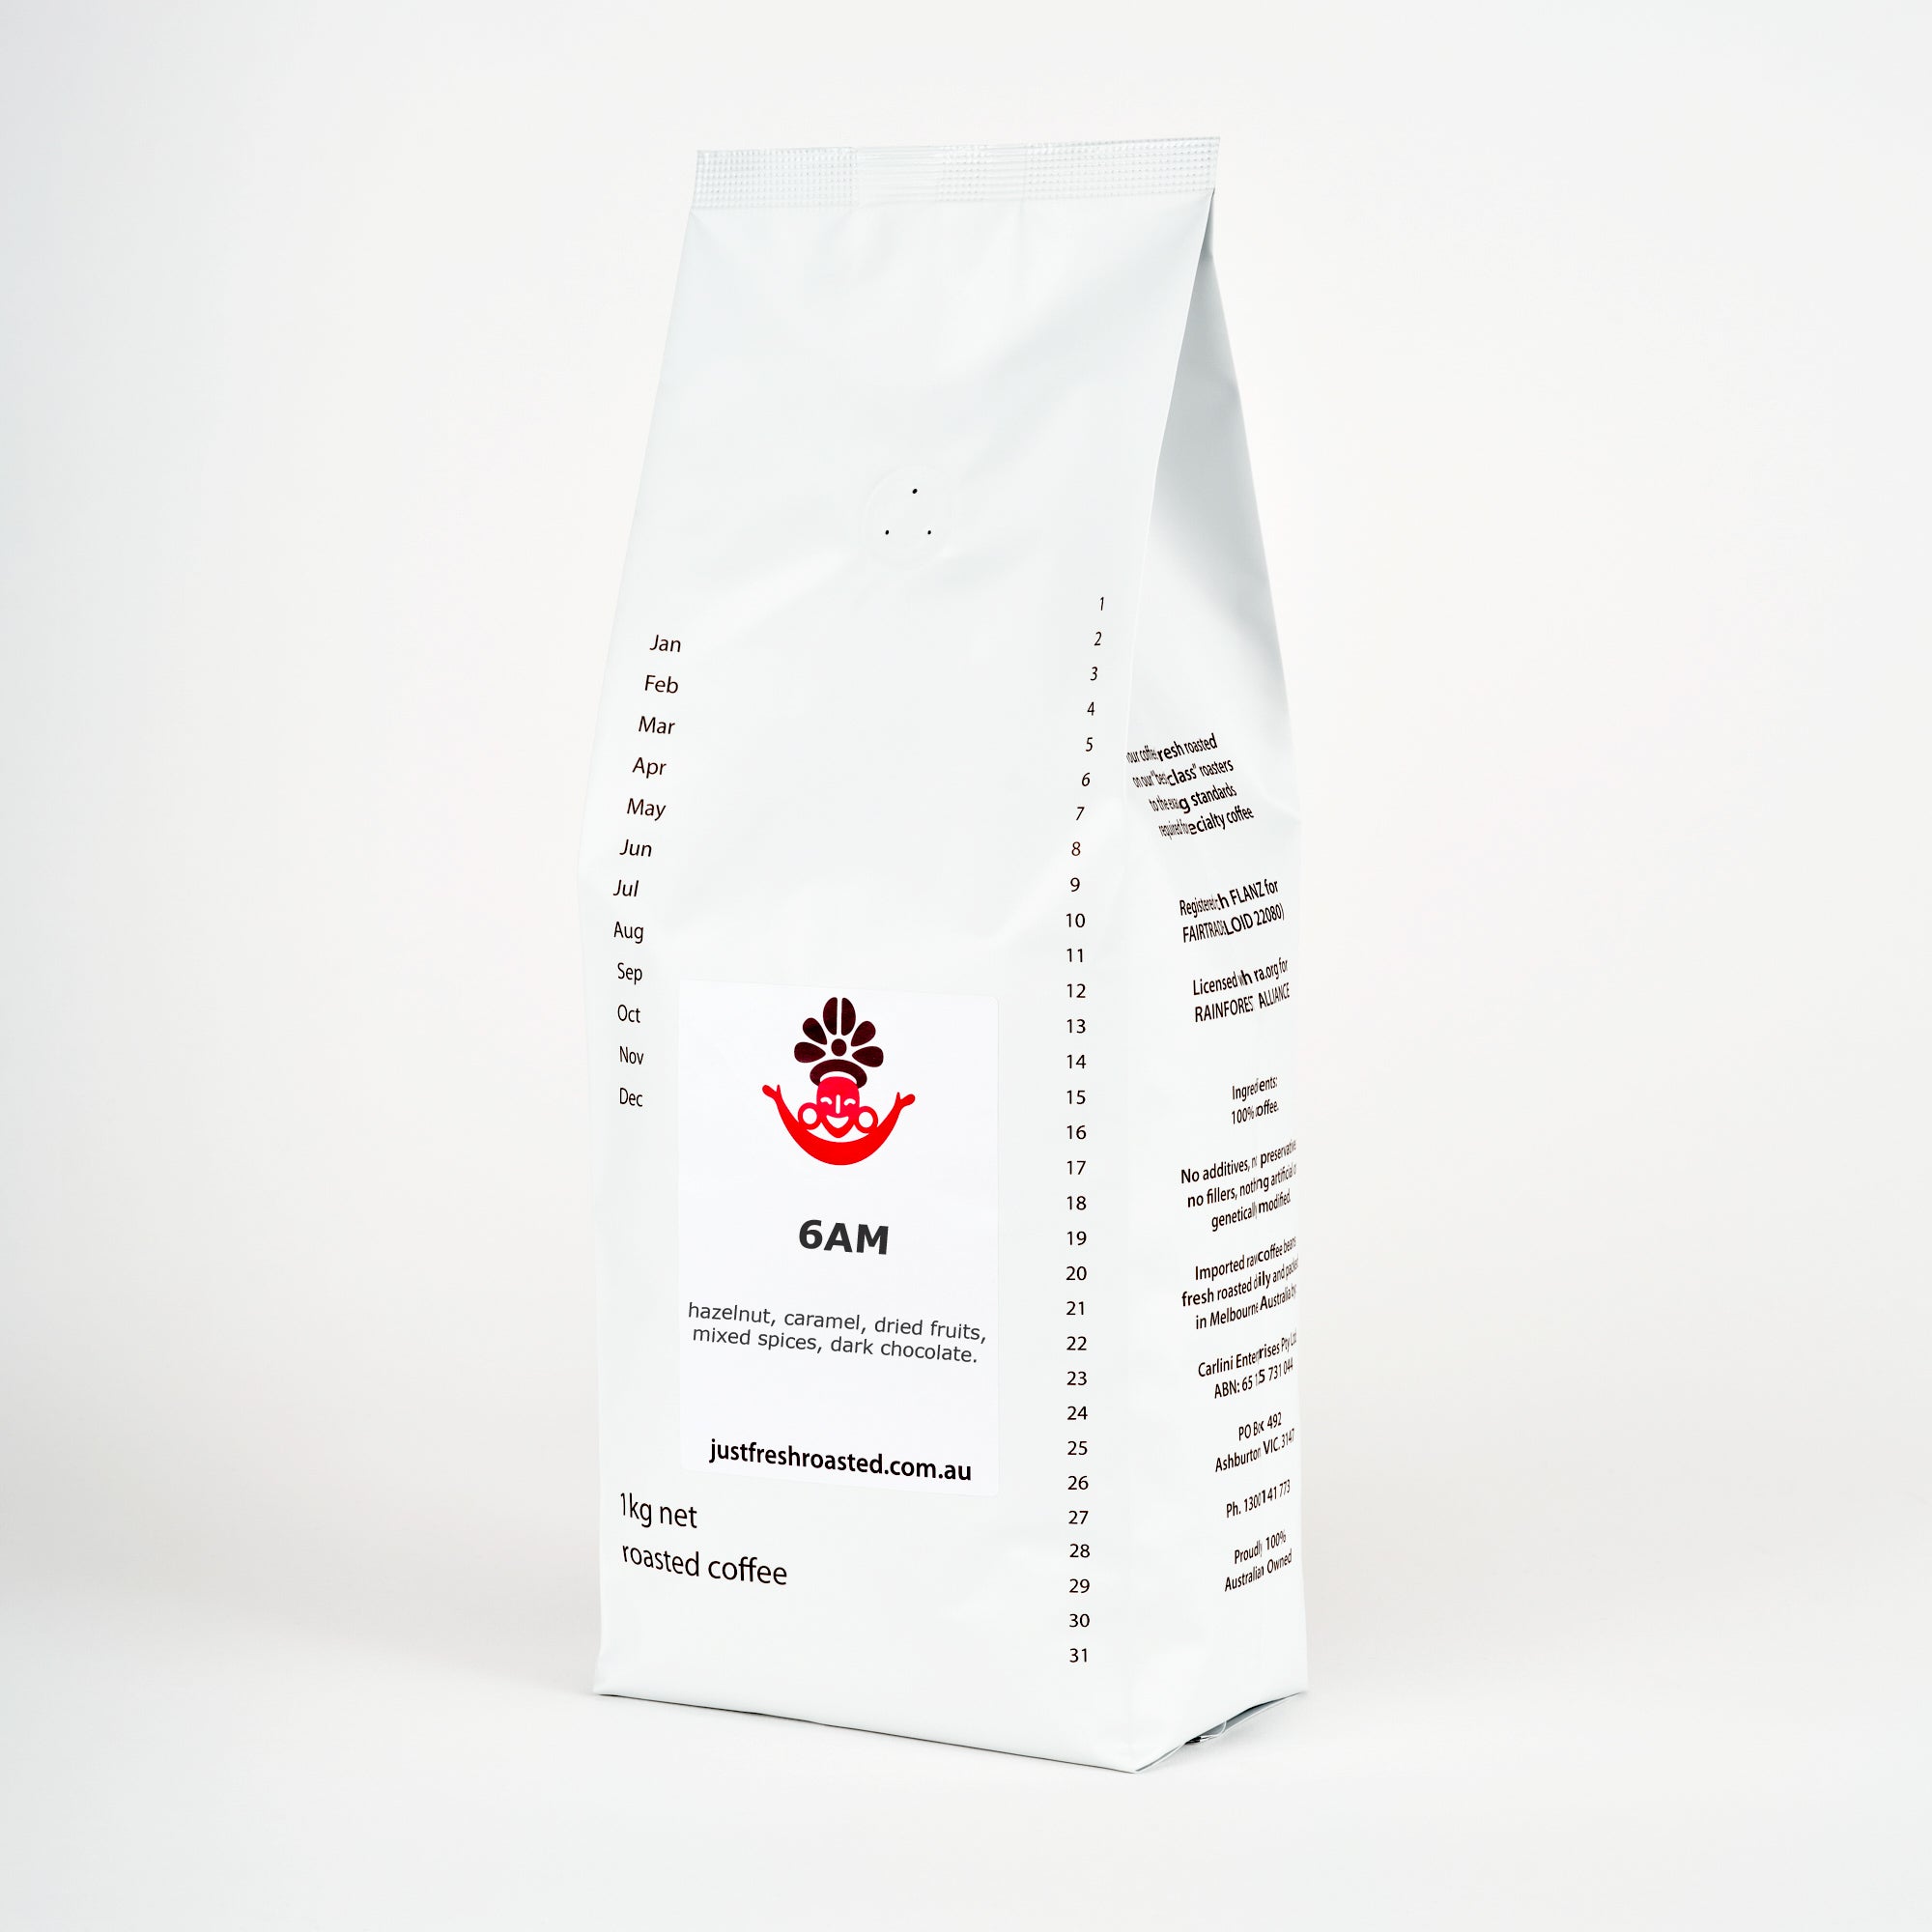 Our 6AM blend in 1kg pack size of fresh roasted coffee